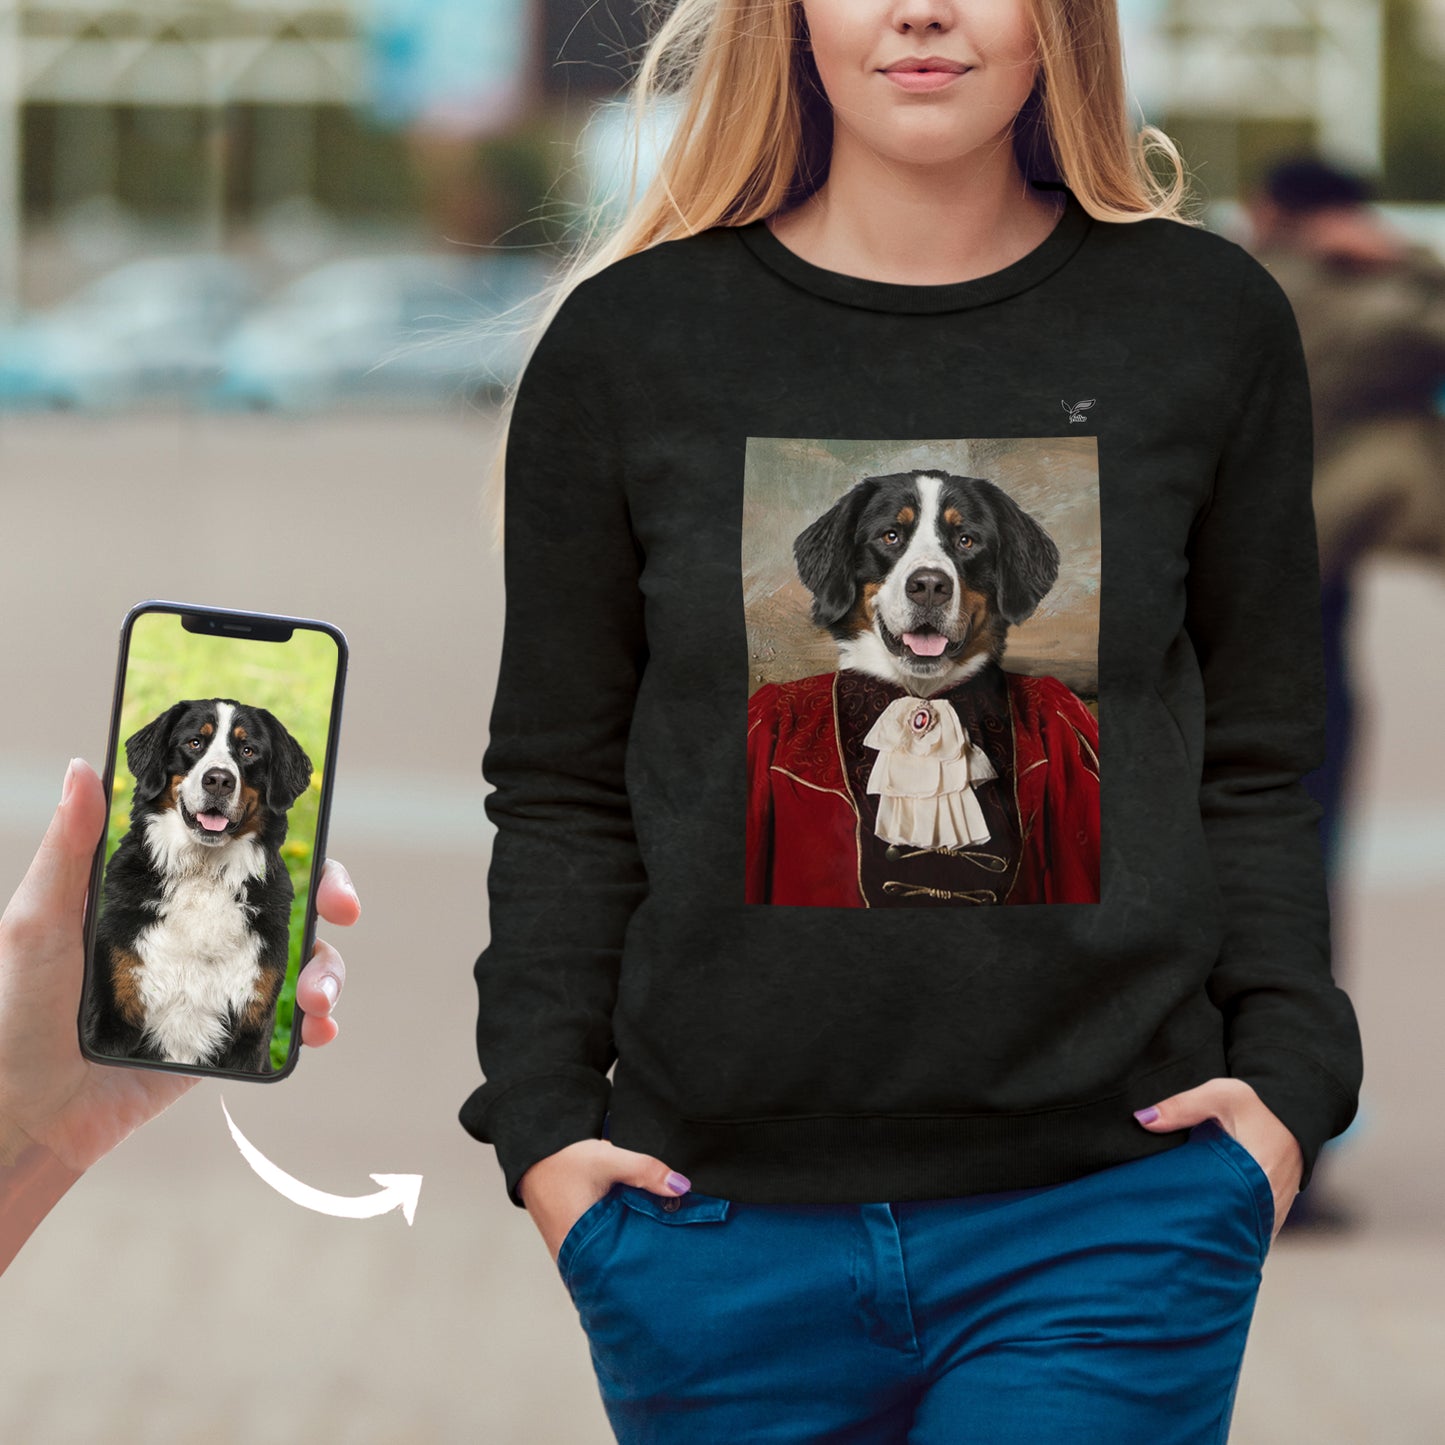 The Aristocrat - Personalized Sweatshirt With Your Pet's Photo